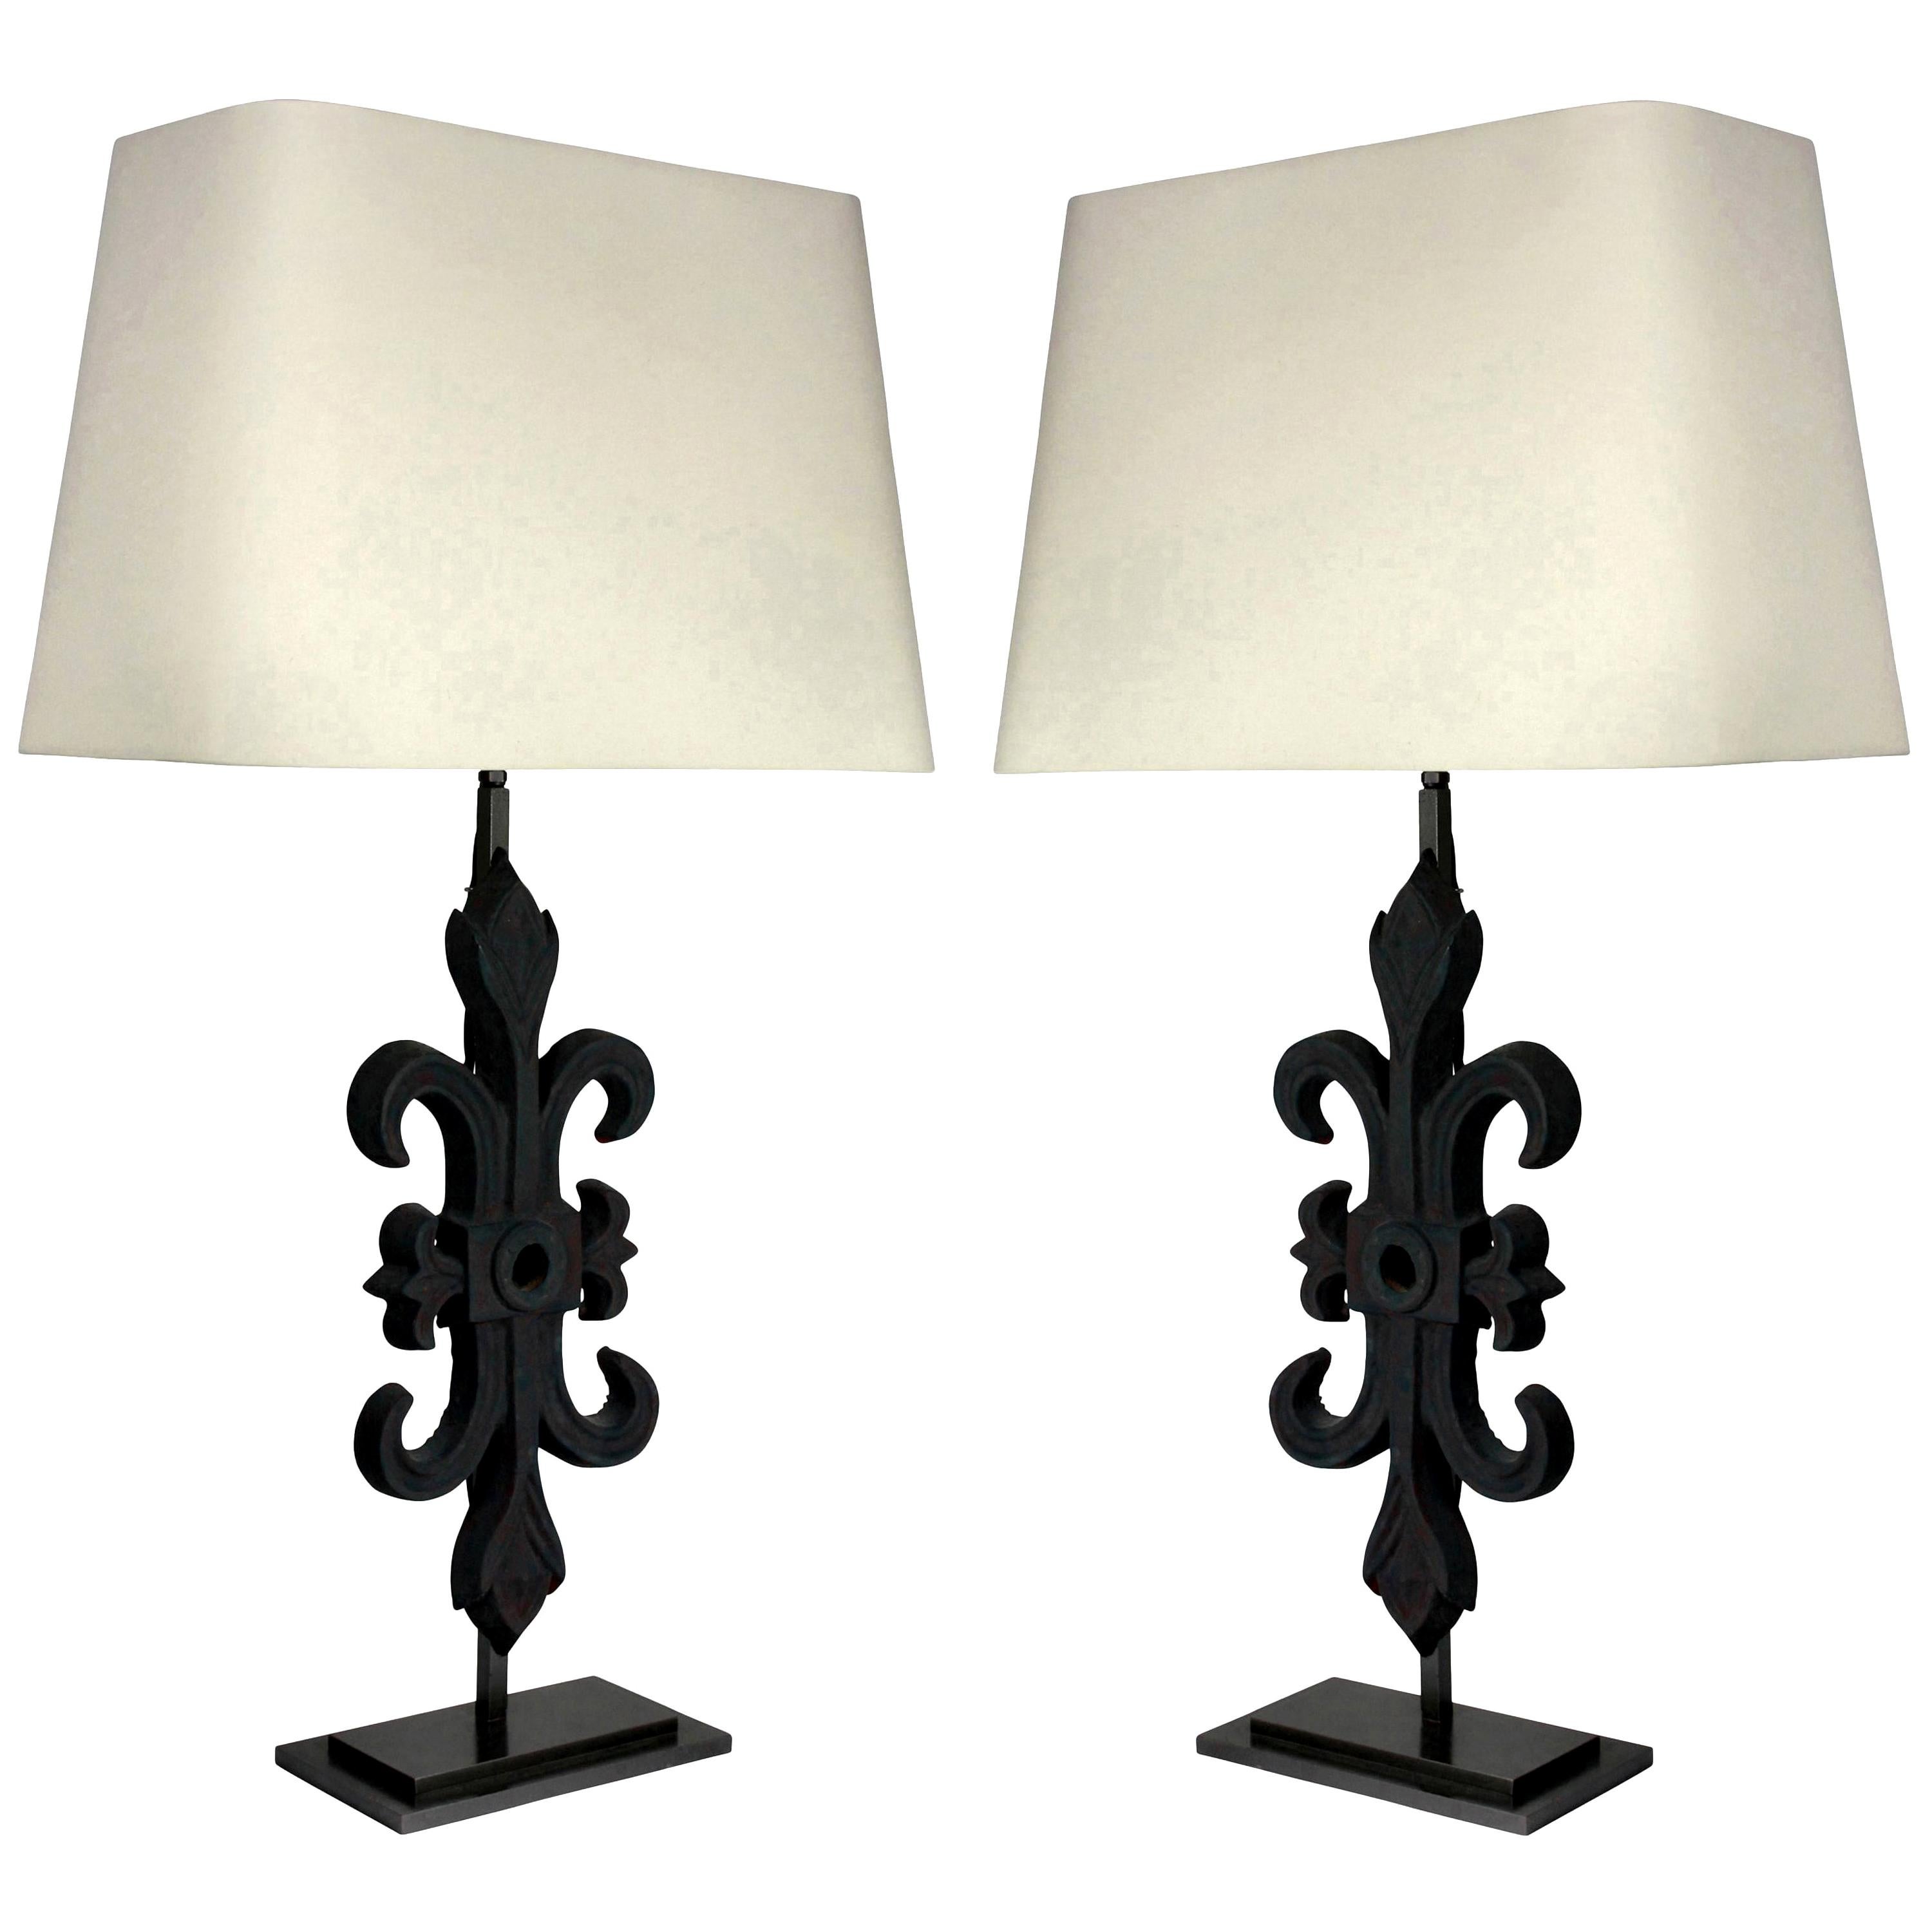 Pair of Architectural Table Lamps